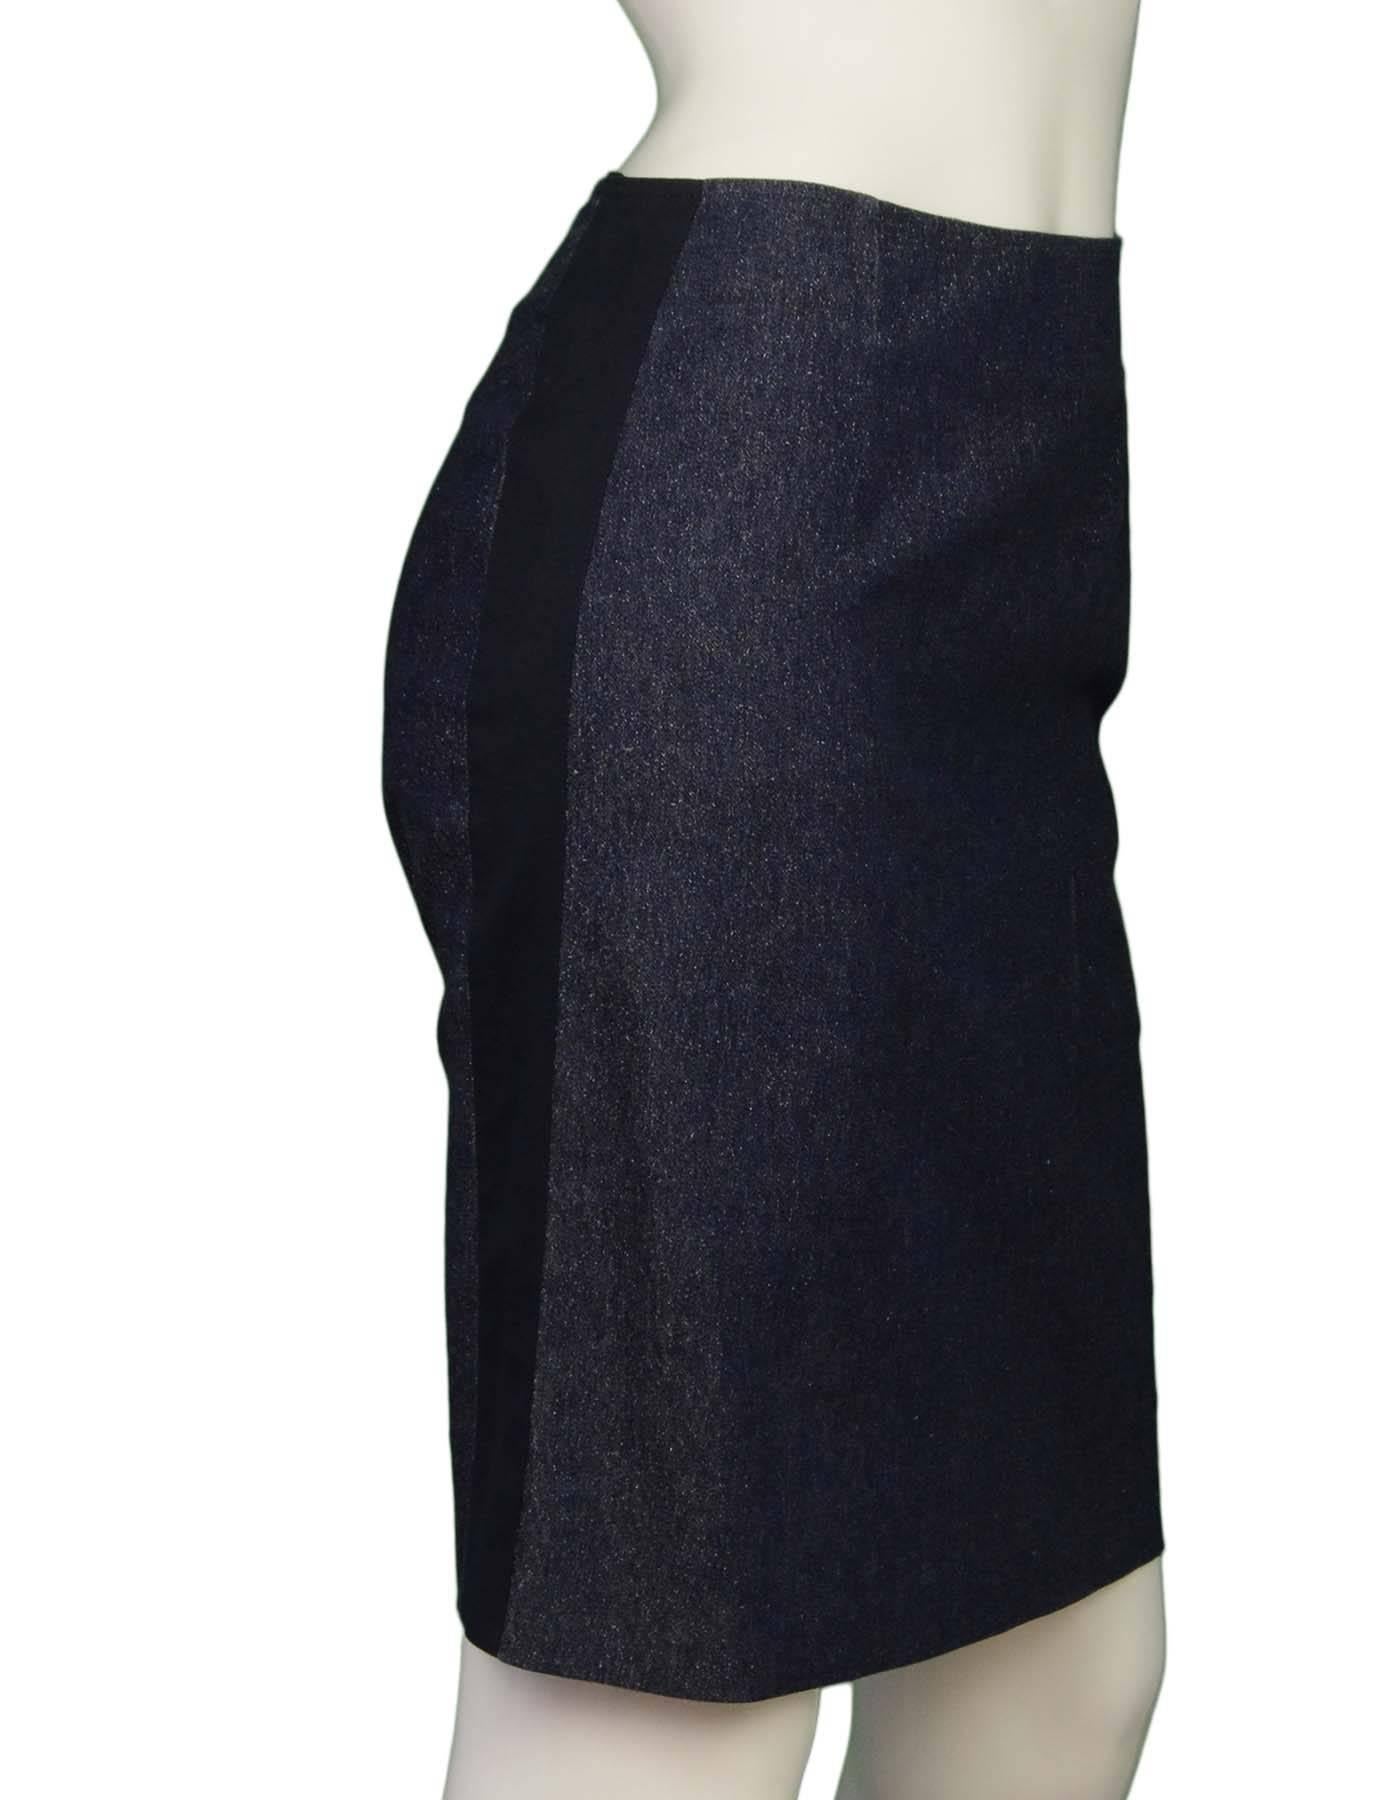 Chanel Blue Glitter Denim Pencil Skirt 
Features glitter threading throughout denim and two navy stripes down each side
Made In: Italy
Year of Production: 2000
Color: Blue and navy
Composition: 90% cotton, 8% polyester, 2% spandex
Lining: